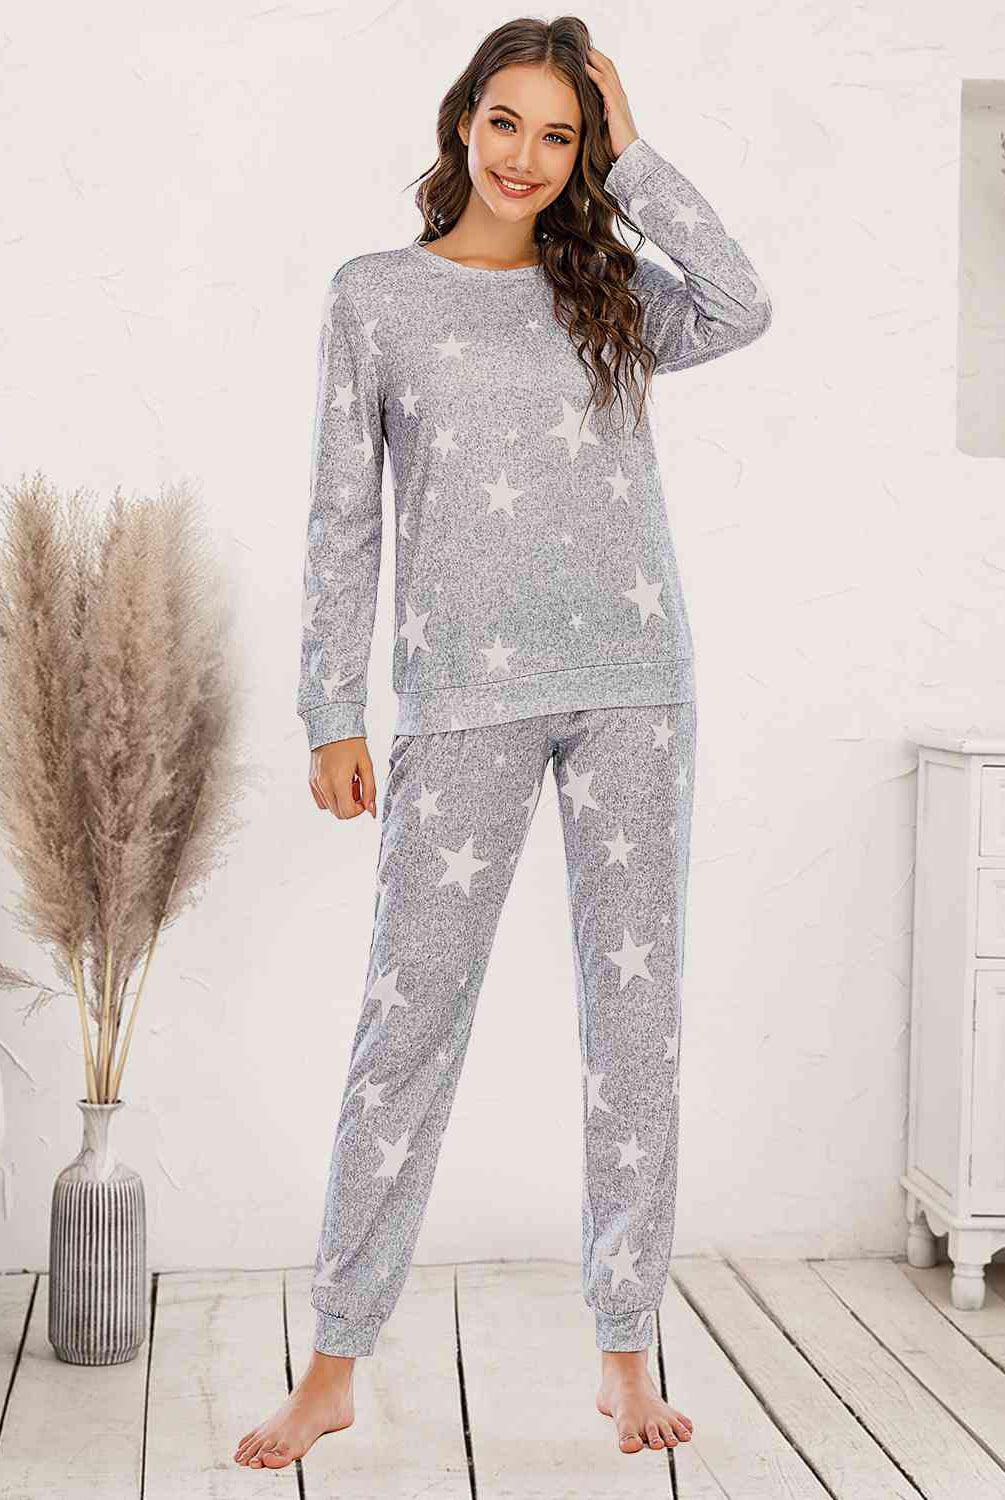 Star Top and Pants Lounge Set - GemThreads Boutique